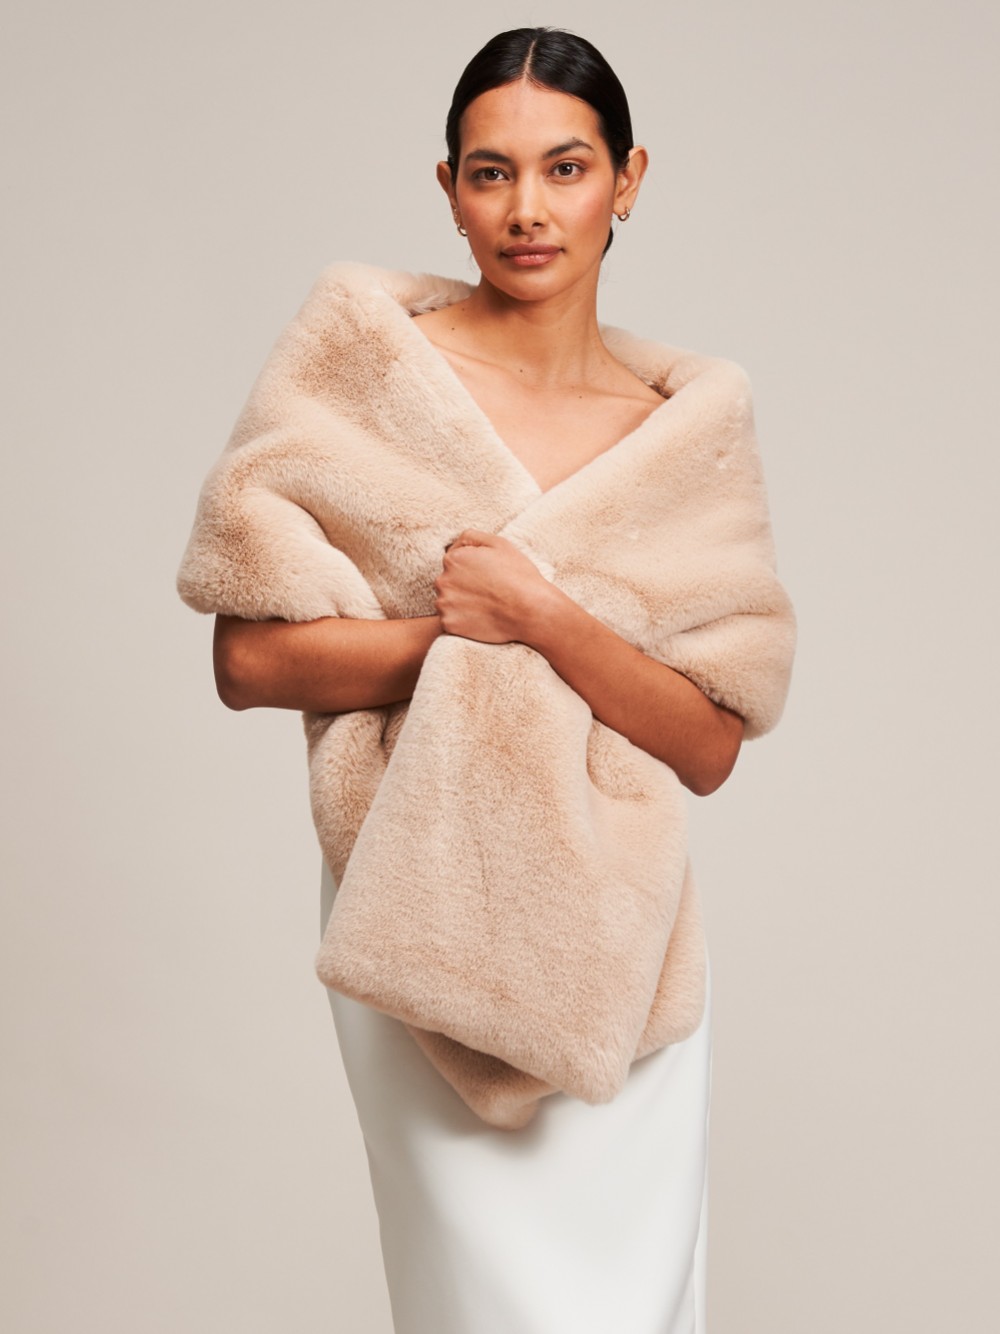 Luxury faux fur accessories for women and the home – Helen Moore